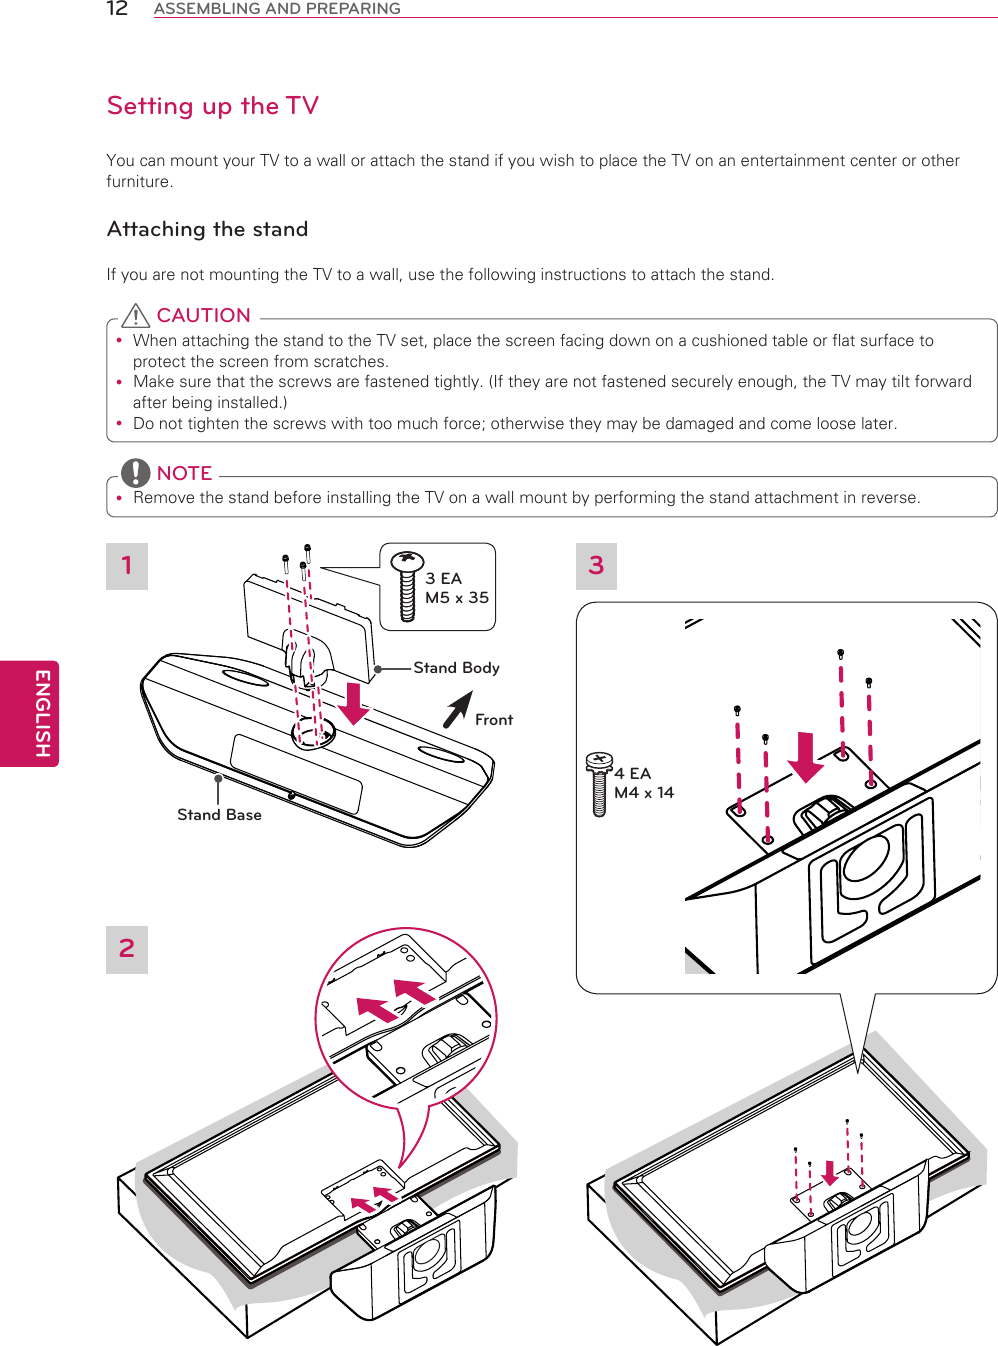 ENGLISH12 ASSEMBLING AND PREPARINGSetting up the TVYou can mount your TV to a wall or attach the stand if you wish to place the TV on an entertainment center or other furniture.Attaching the standIf you are not mounting the TV to a wall, use the following instructions to attach the stand. When attaching the stand to the TV set, place the screen facing down on a cushioned table or flat surface to protect the screen from scratches. Make sure that the screws are fastened tightly. (If they are not fastened securely enough, the TV may tilt forward after being installed.) Do not tighten the screws with too much force; otherwise they may be damaged and come loose later. CAUTION Remove the stand before installing the TV on a wall mount by performing the stand attachment in reverse. NOTEStand BodyStand BaseFront13 EA M5 x 3534 EA M4 x 142